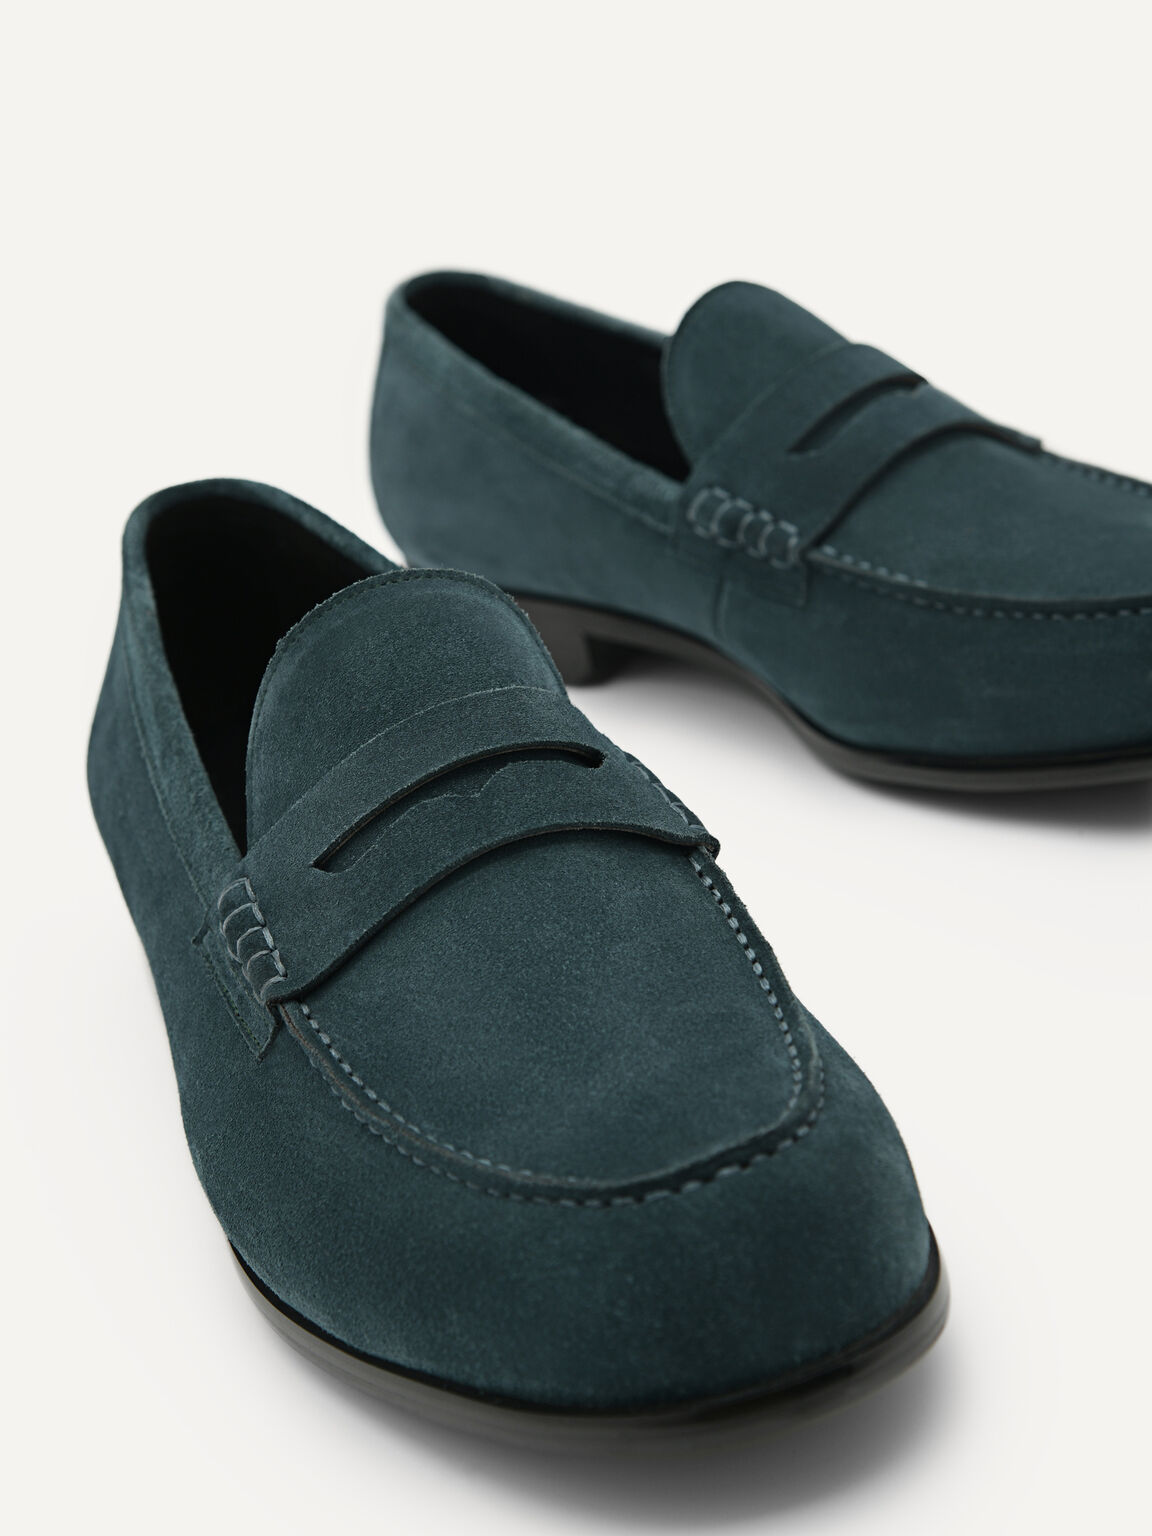 Leather Penny Loafers, Teal